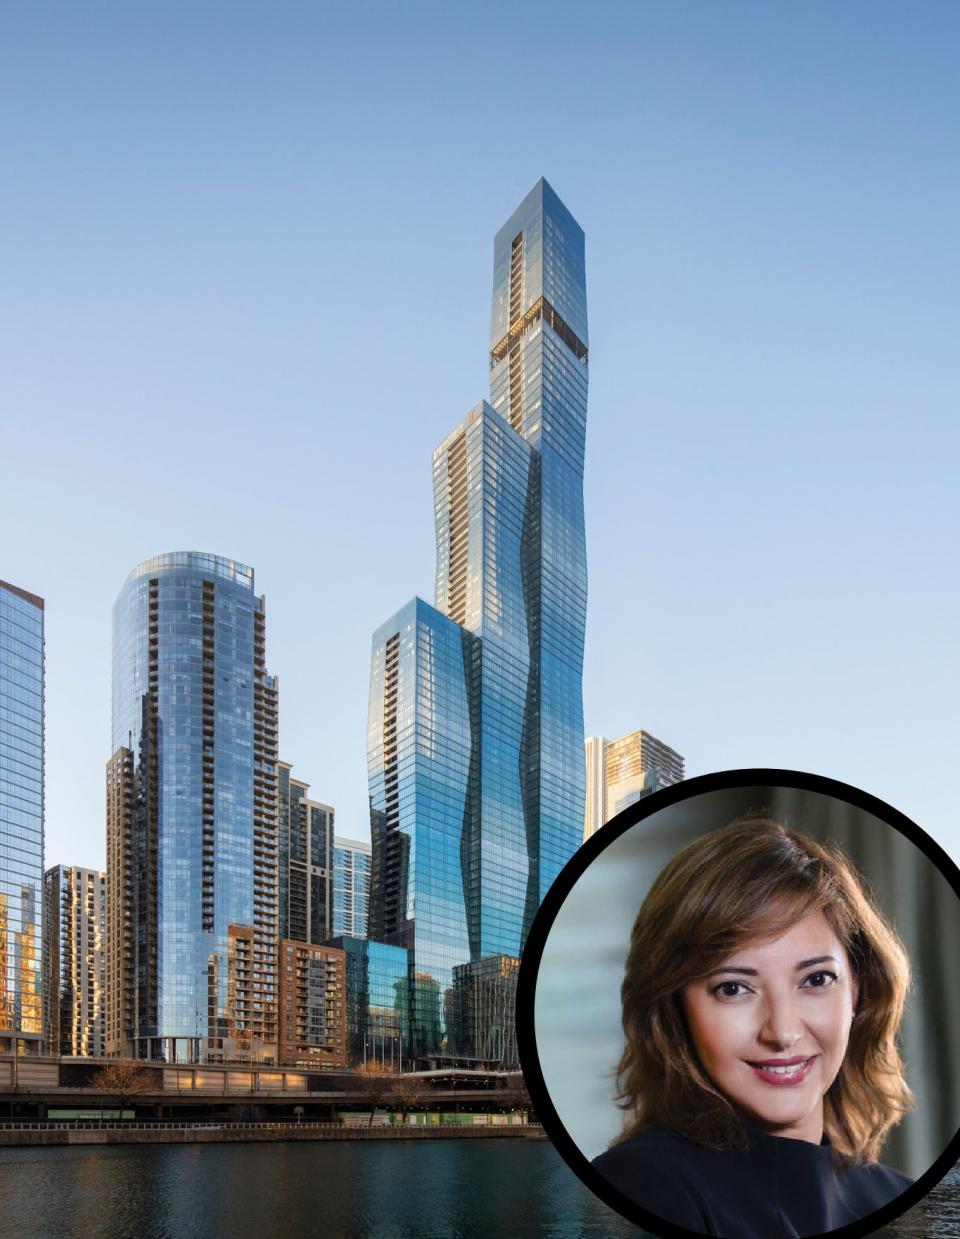 The St. Regis Chicago—part of Marriott International’s luxury portfolio, which is overseen by Tina Edmundson (inset)—was designed by world-renowned architect Jeanne Gang of Studio Gang. The 101-story tower is the tallest building in the world designed by a woman.